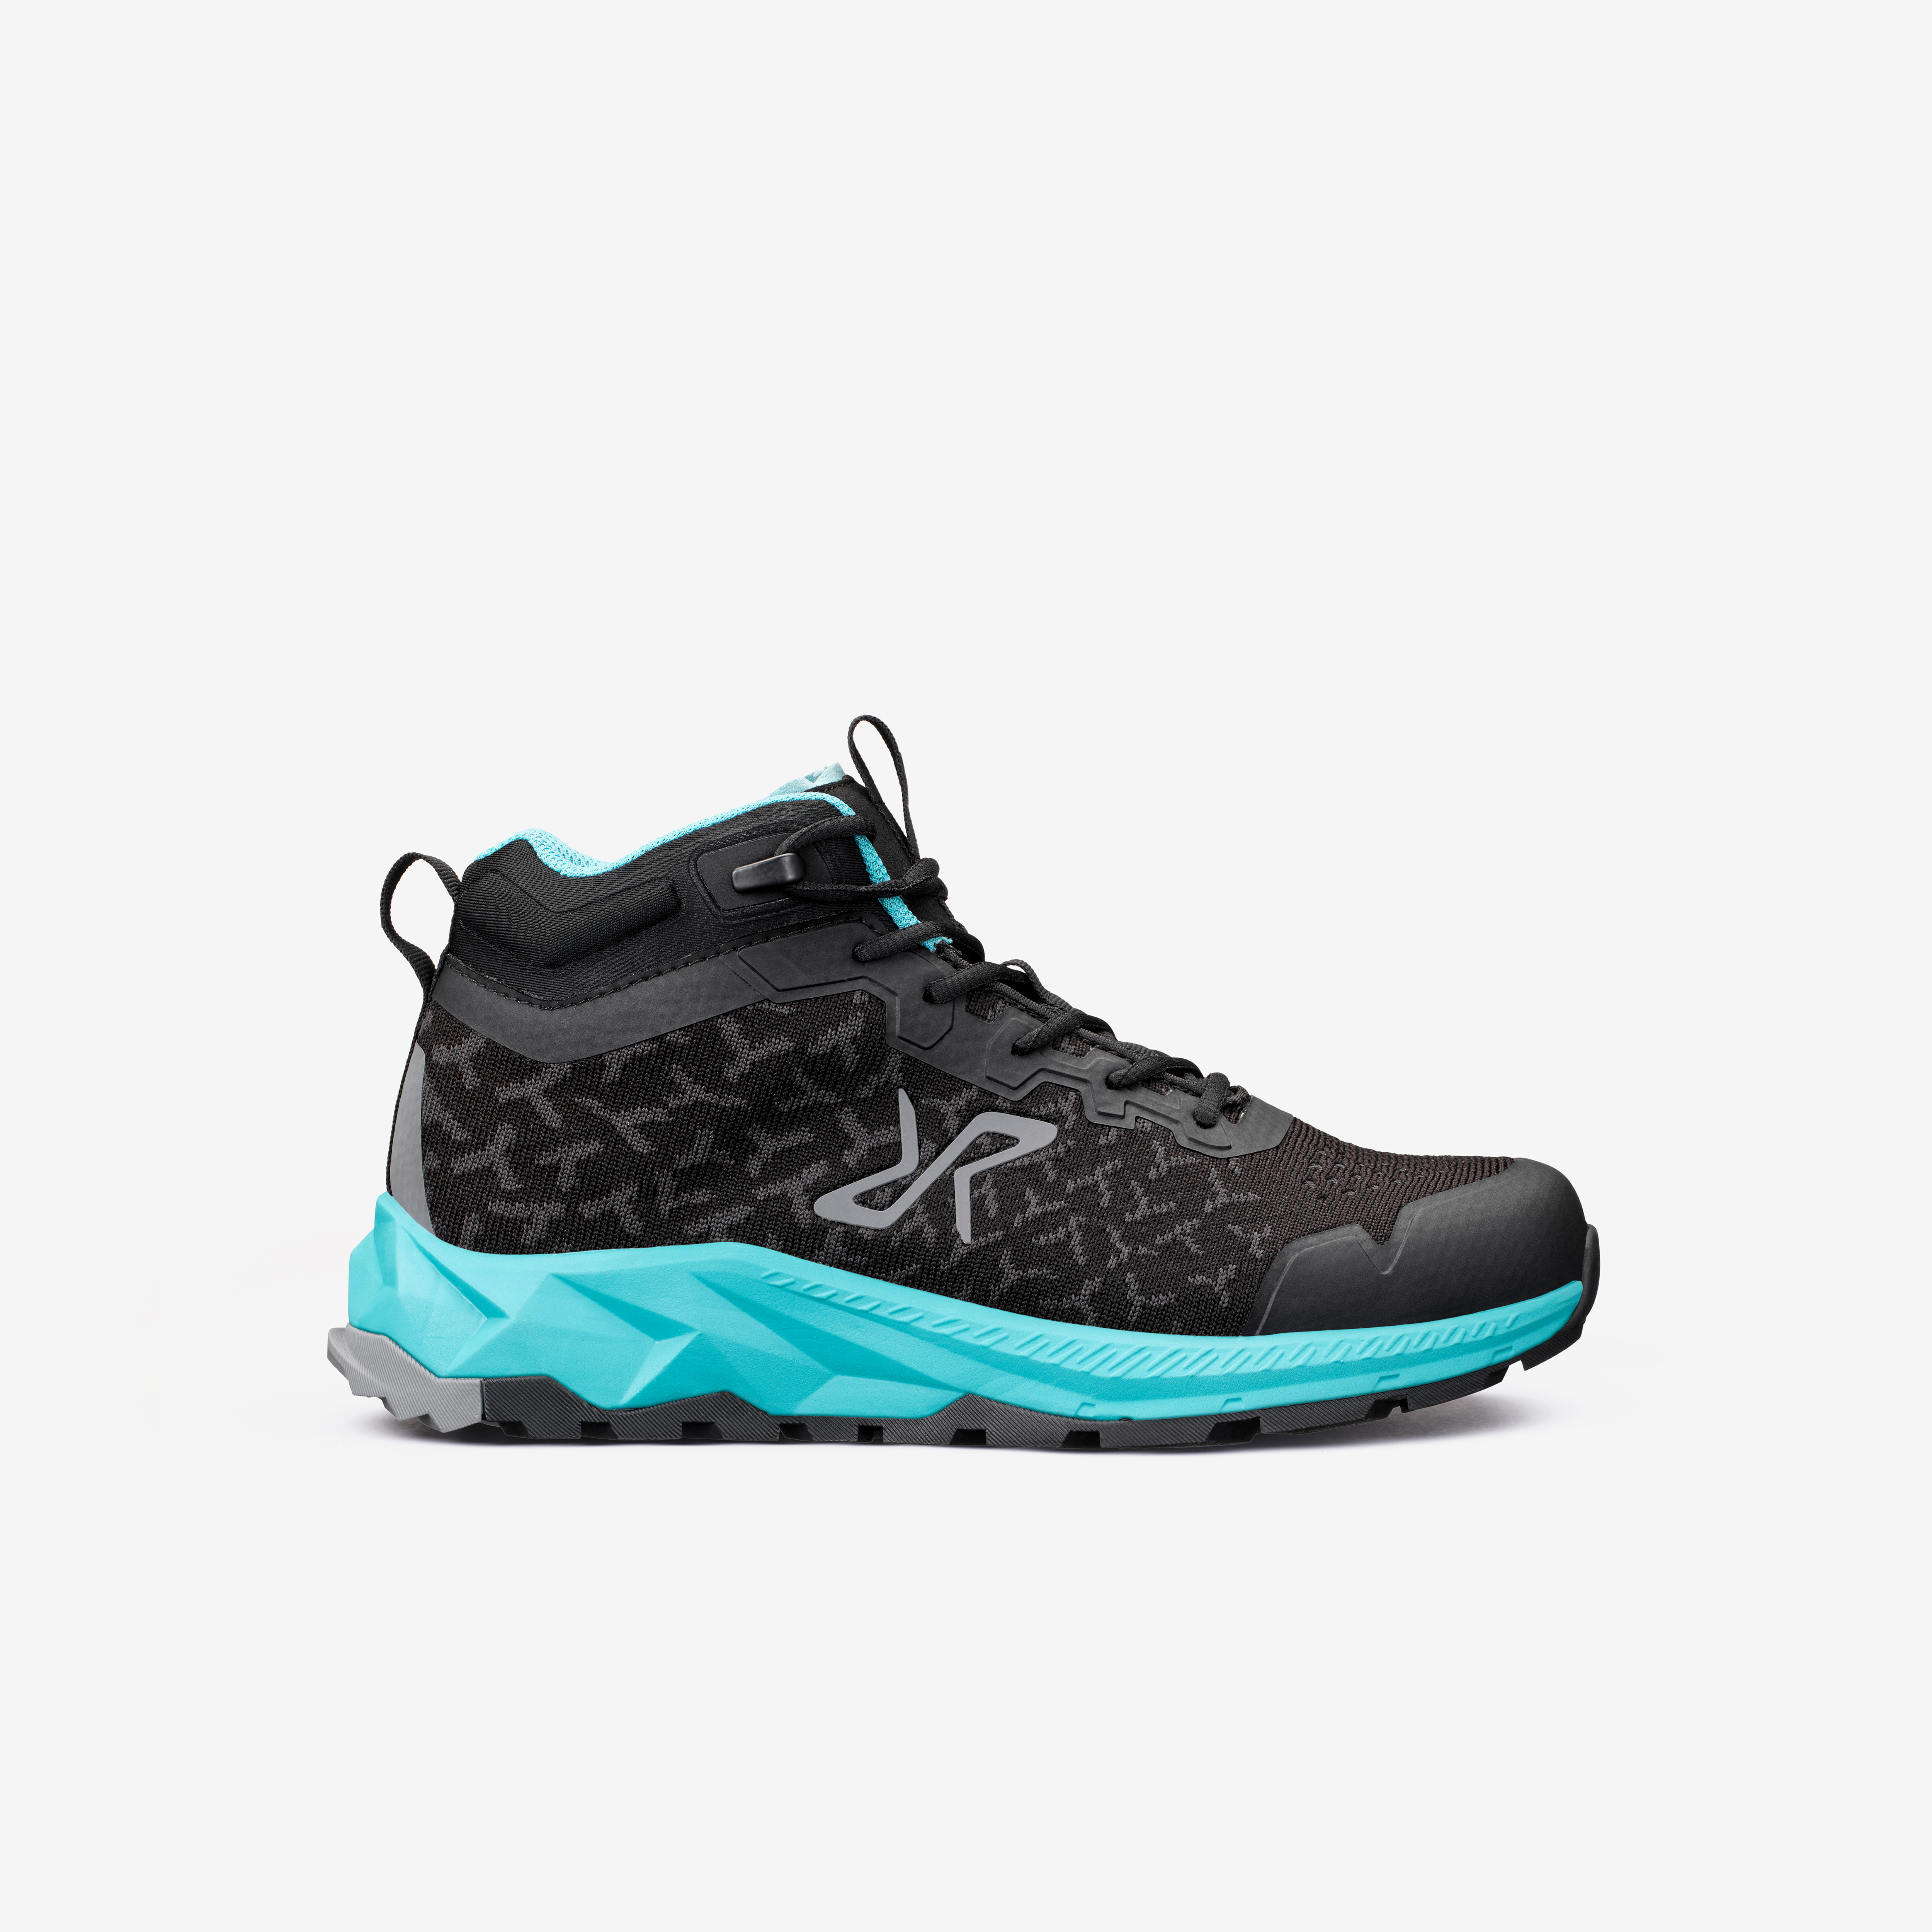 Trailknit Waterproof Mid Hiking Shoes Black/Turquoise Femme